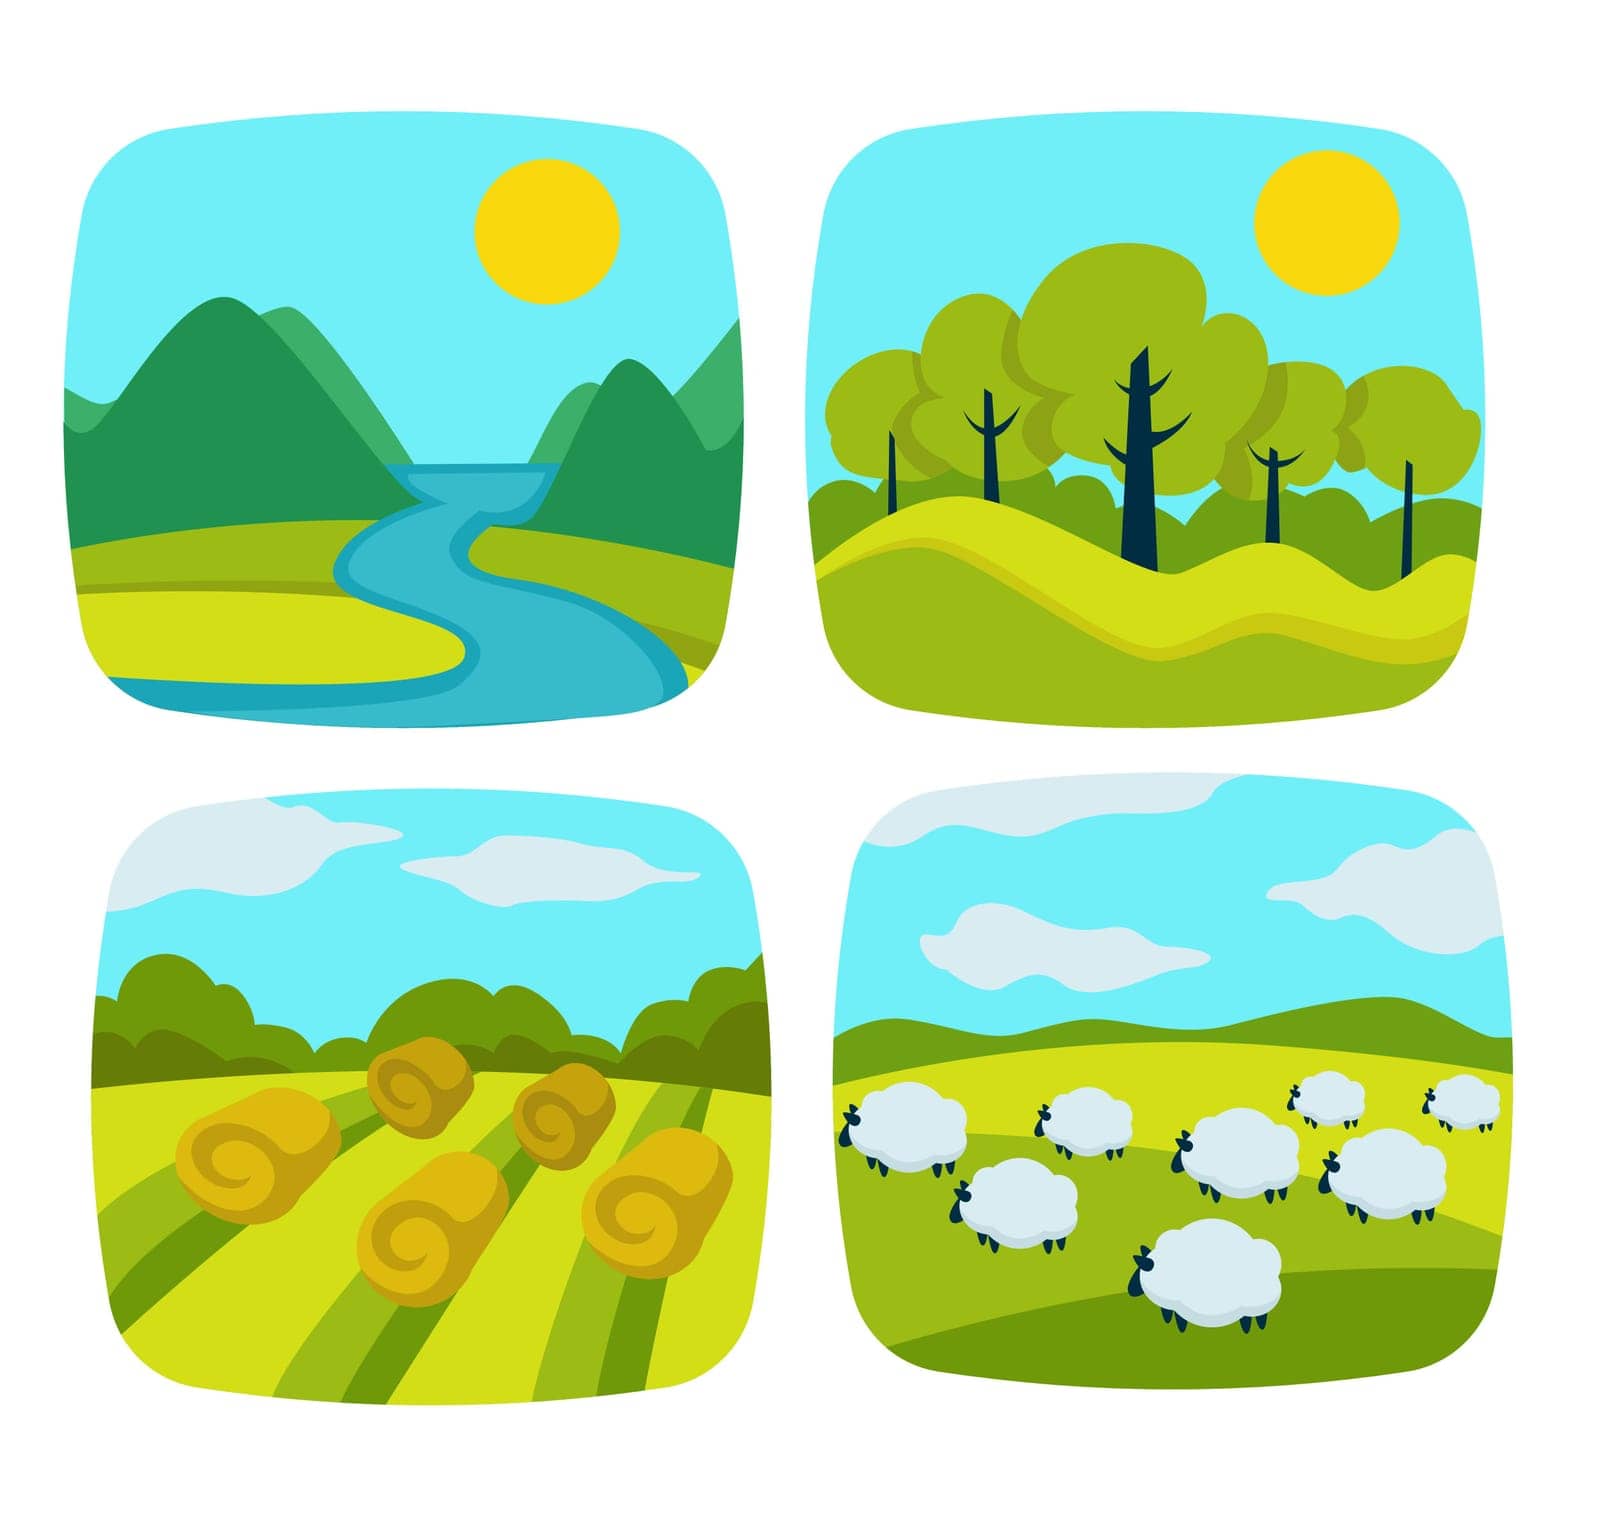 A collection of vector landscape scenes, showcasing tranquil nature for peaceful design use.